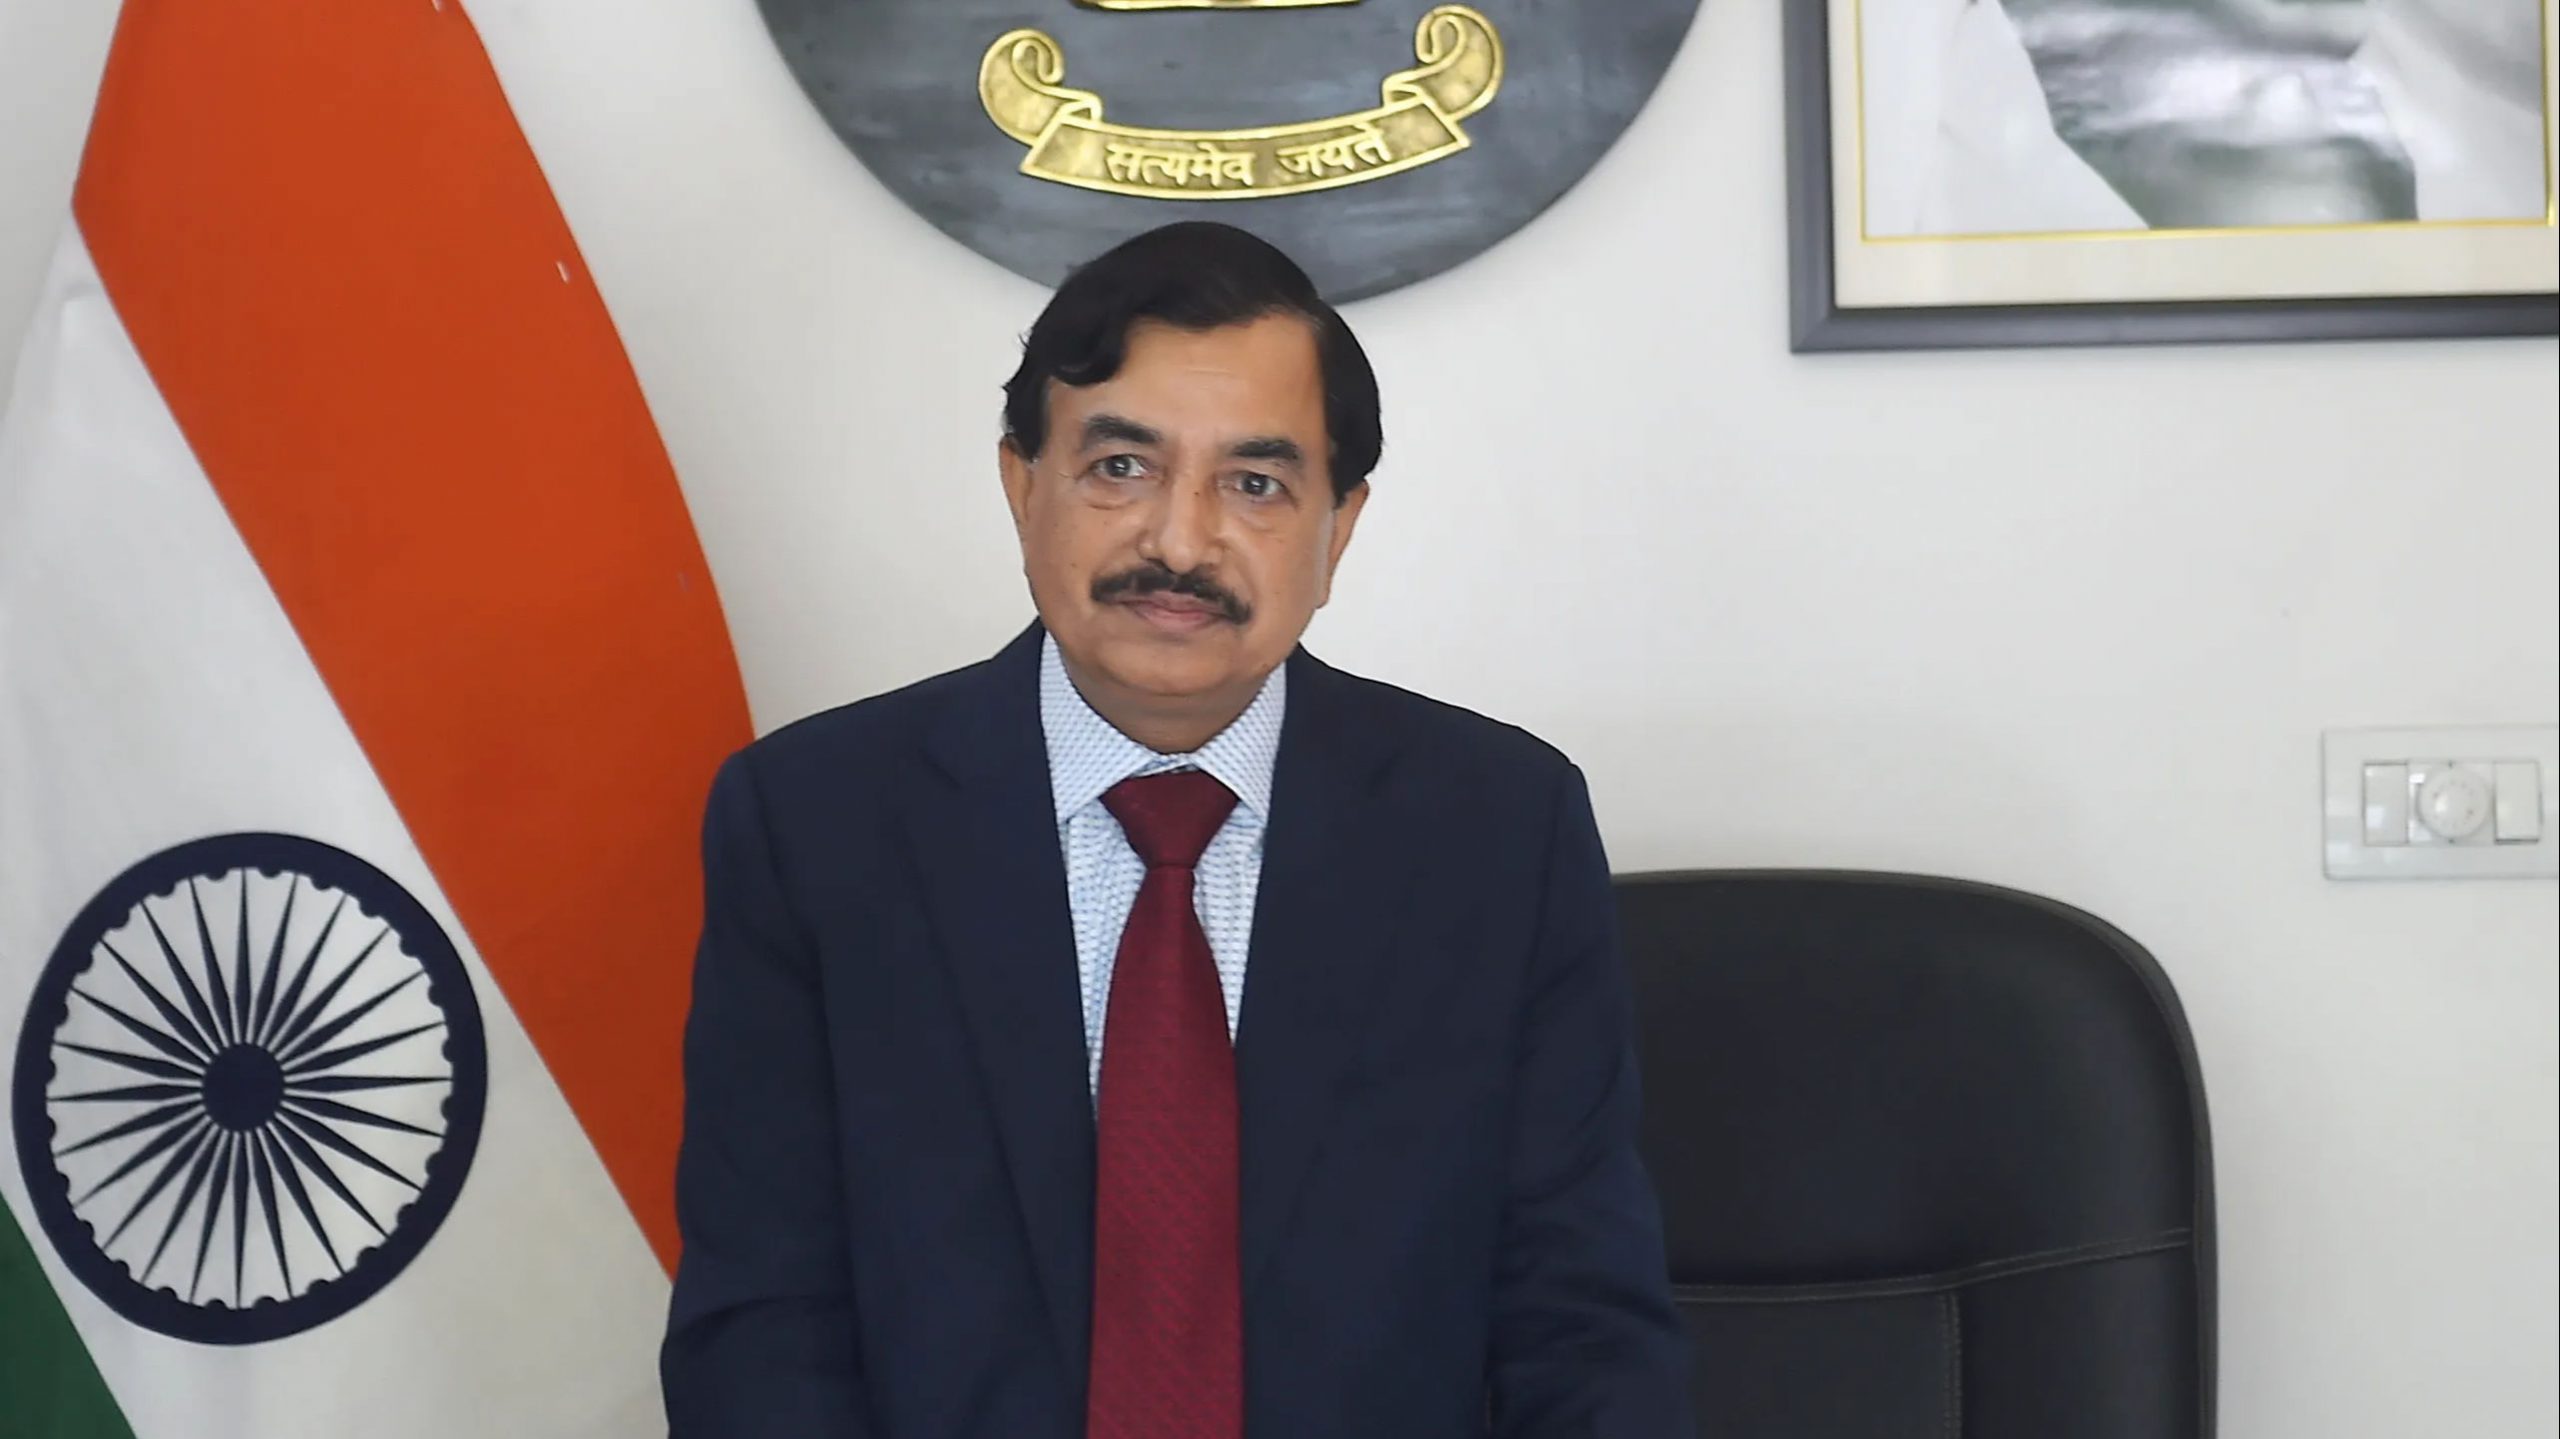 Who is Sushil Chandra, the new Chief Election Commissioner?